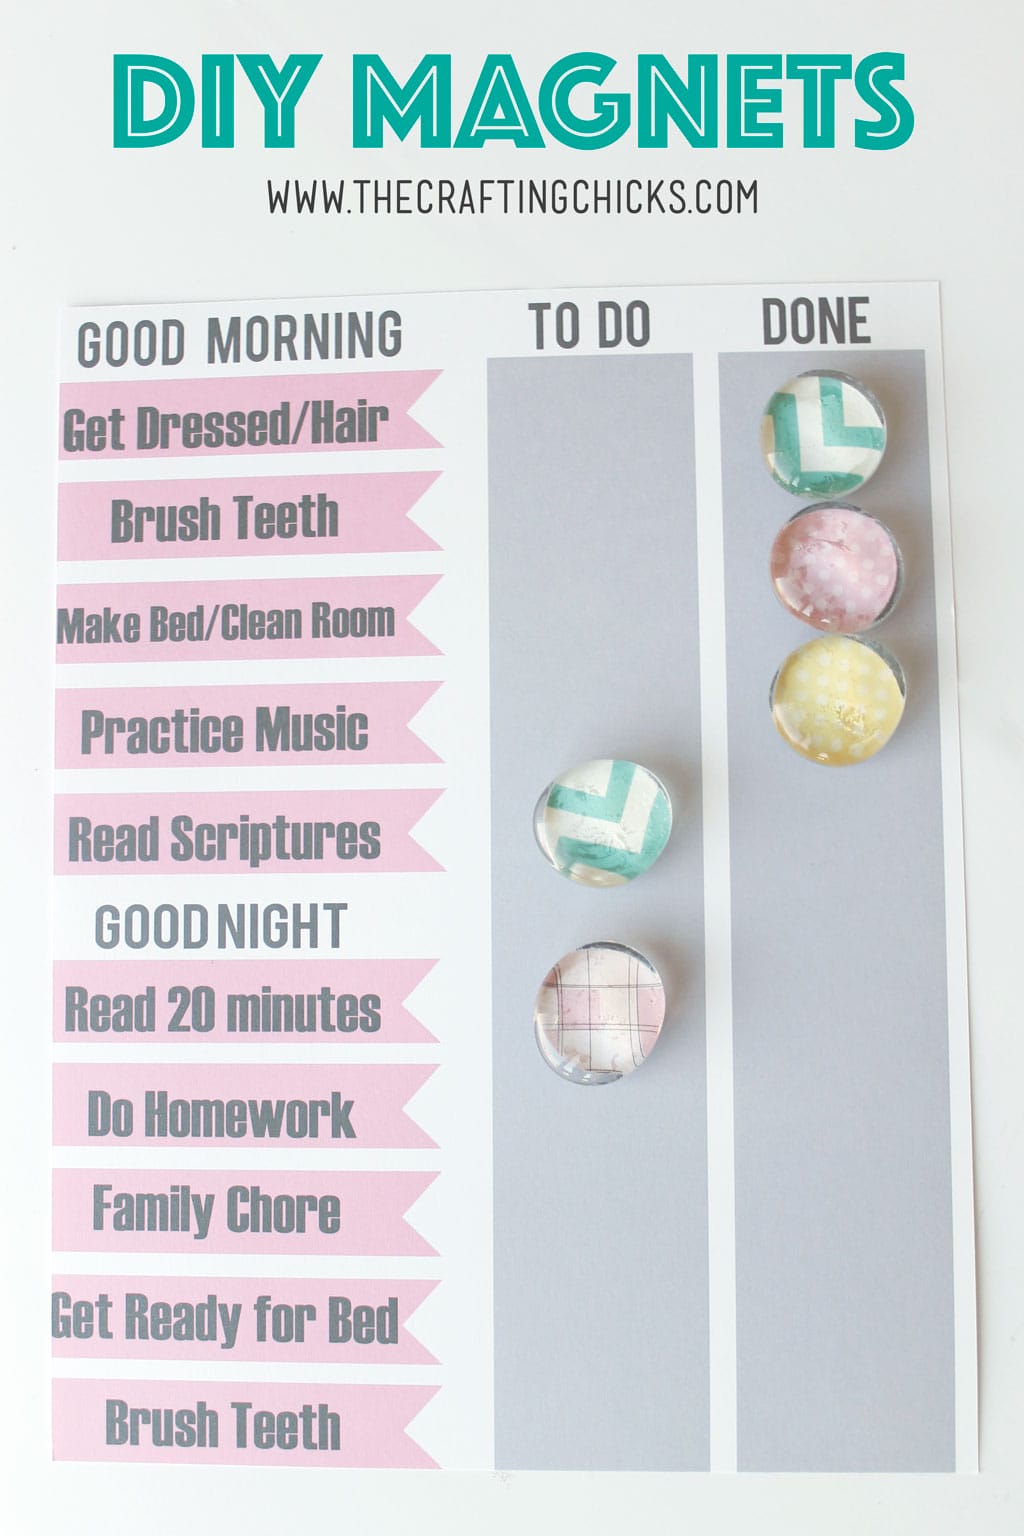 DIY Magnets are so easy to make and coordinate with your home decor. A great craft for kids and crafters of any skill level.